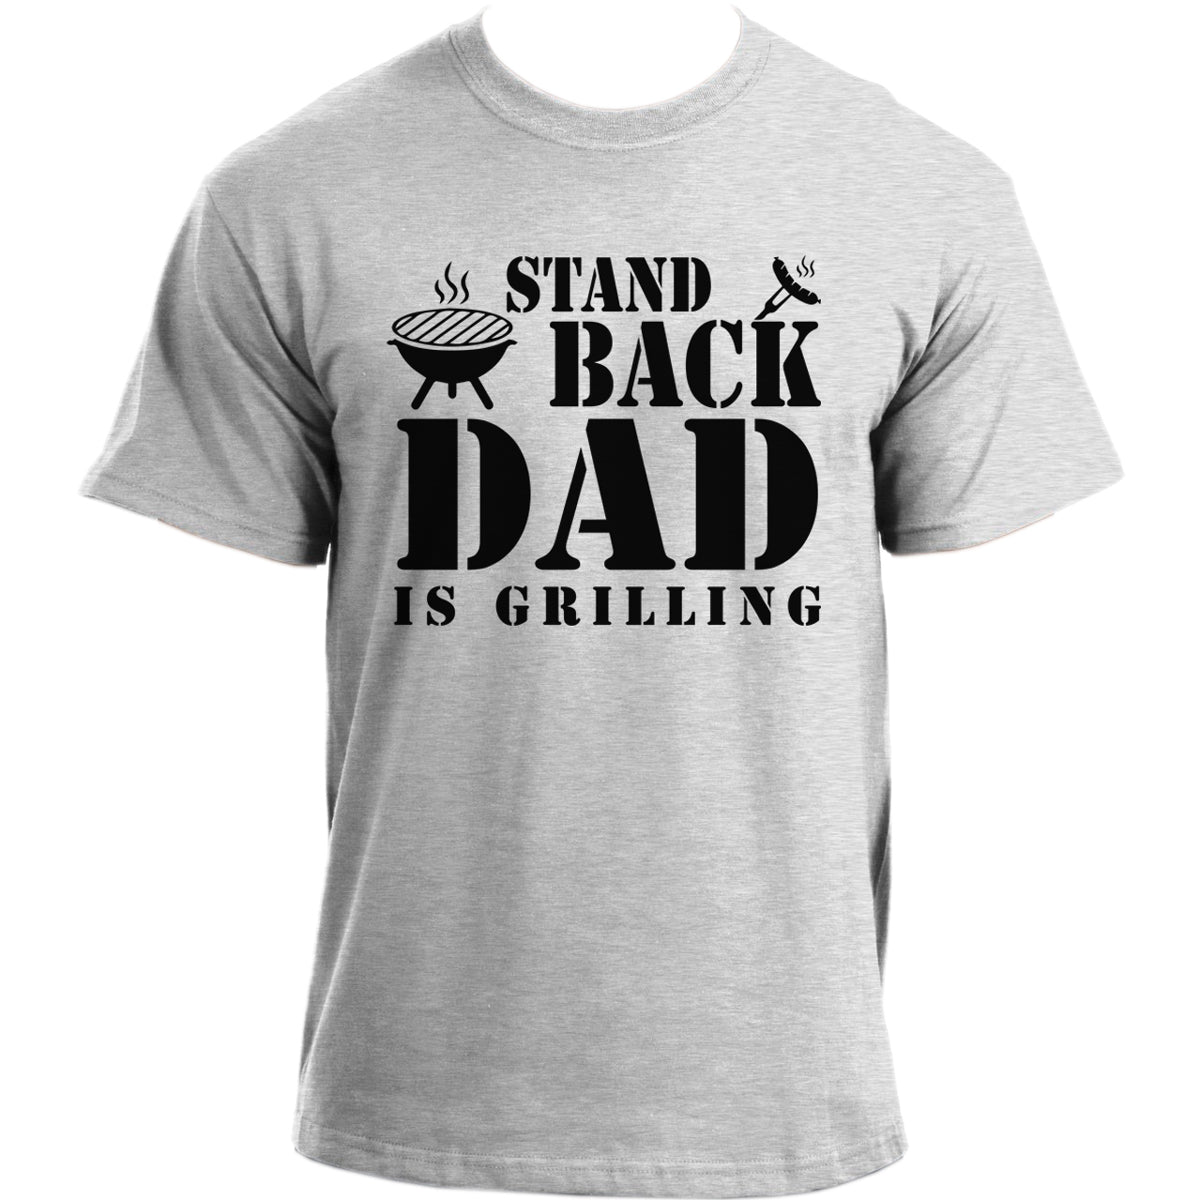 Stand Back Dad is Grilling T-Shirt I BBQ Dad T Shirt I Fathers Day Tshirt I Barbecue Chef T-Shirt